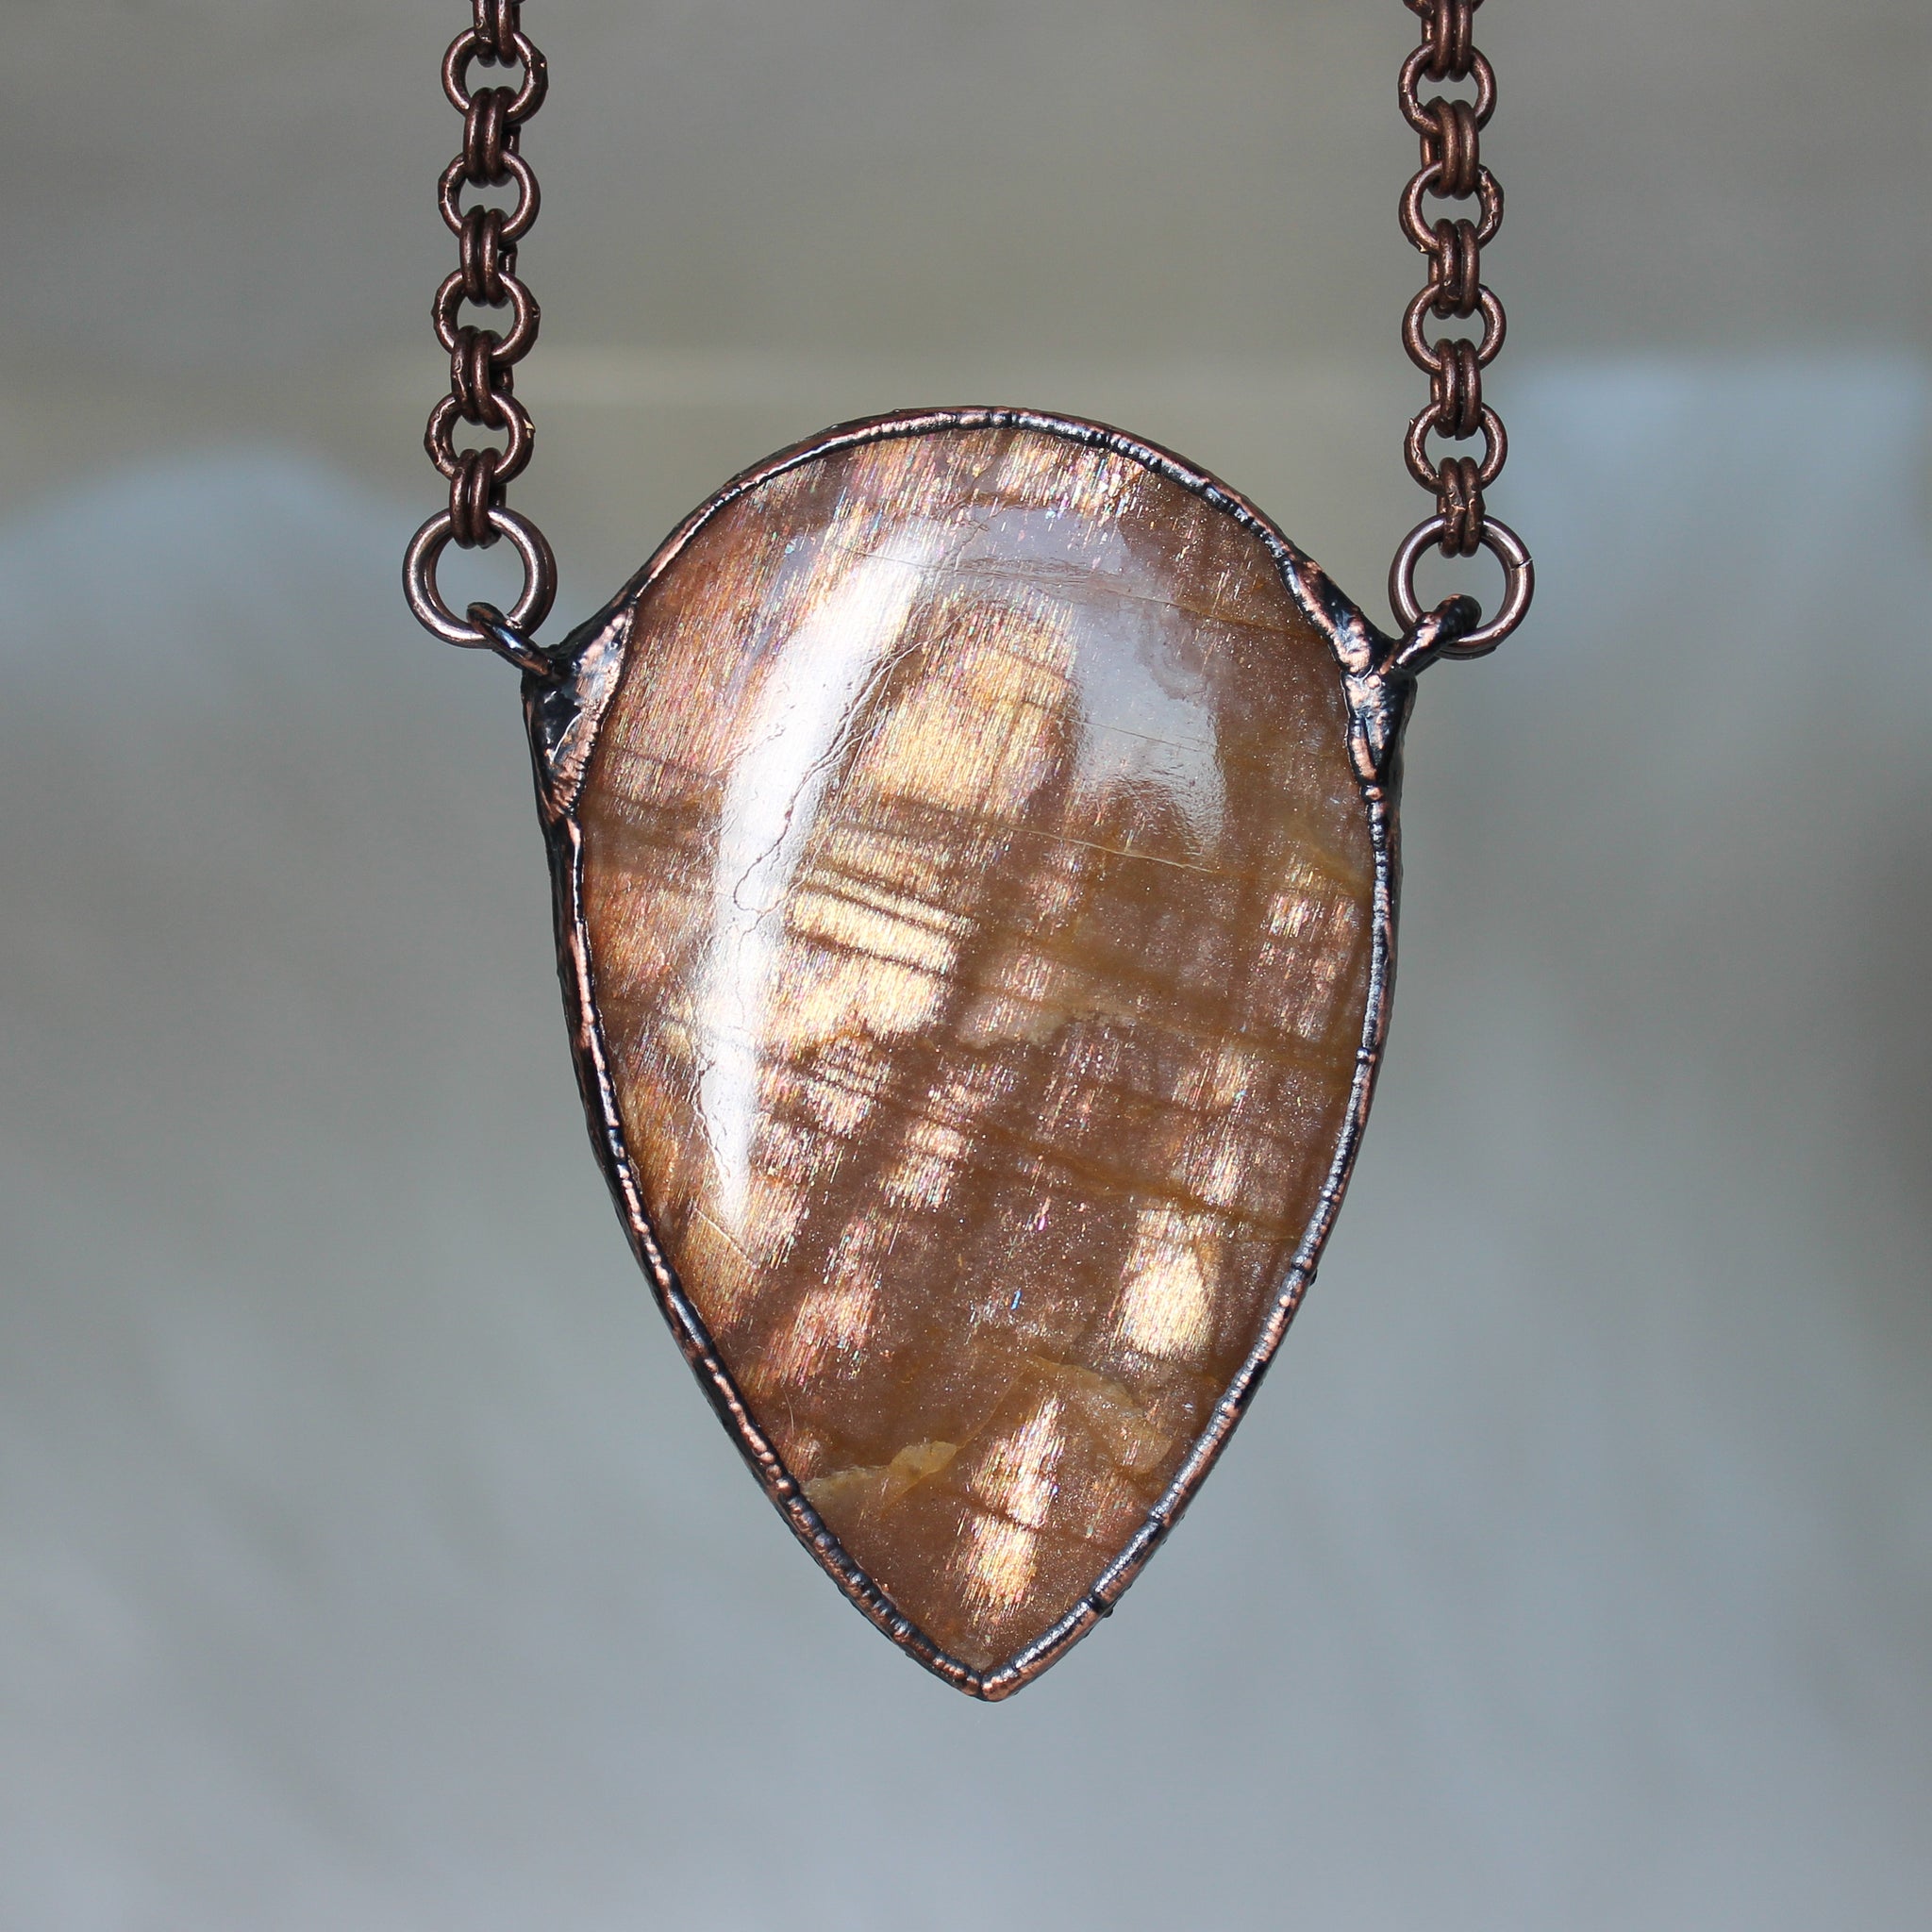 Giant Sunstone Necklace A